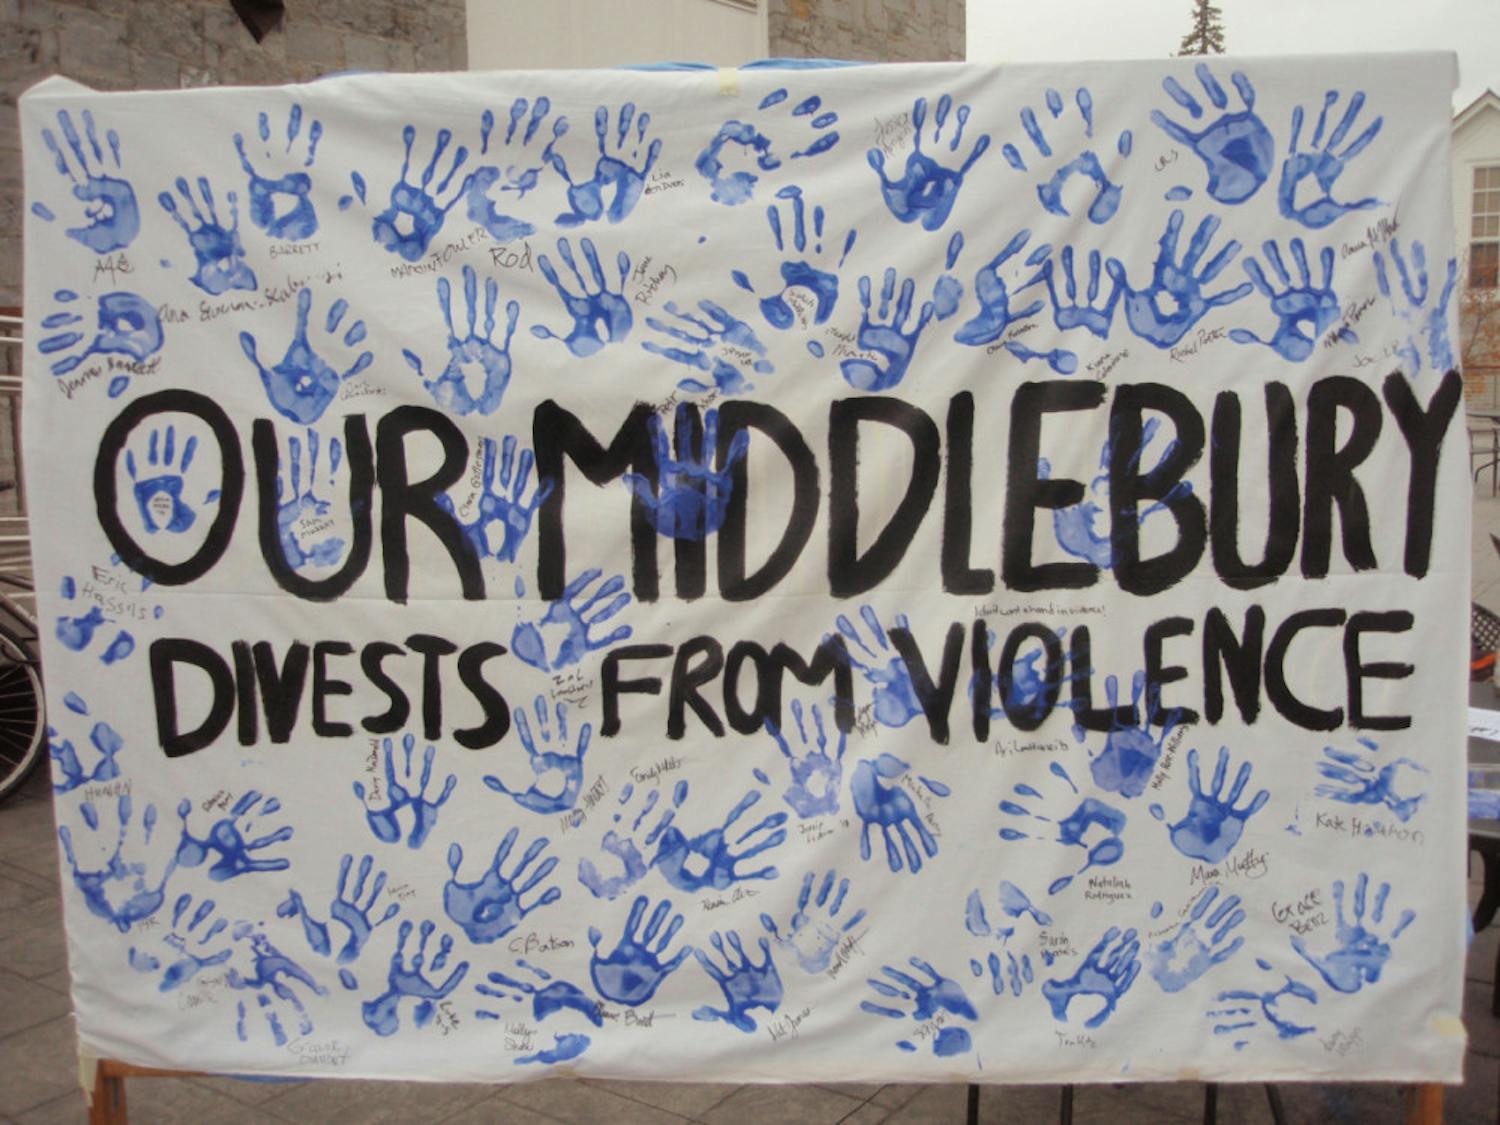 our-middlebury-divests-from-violence-61